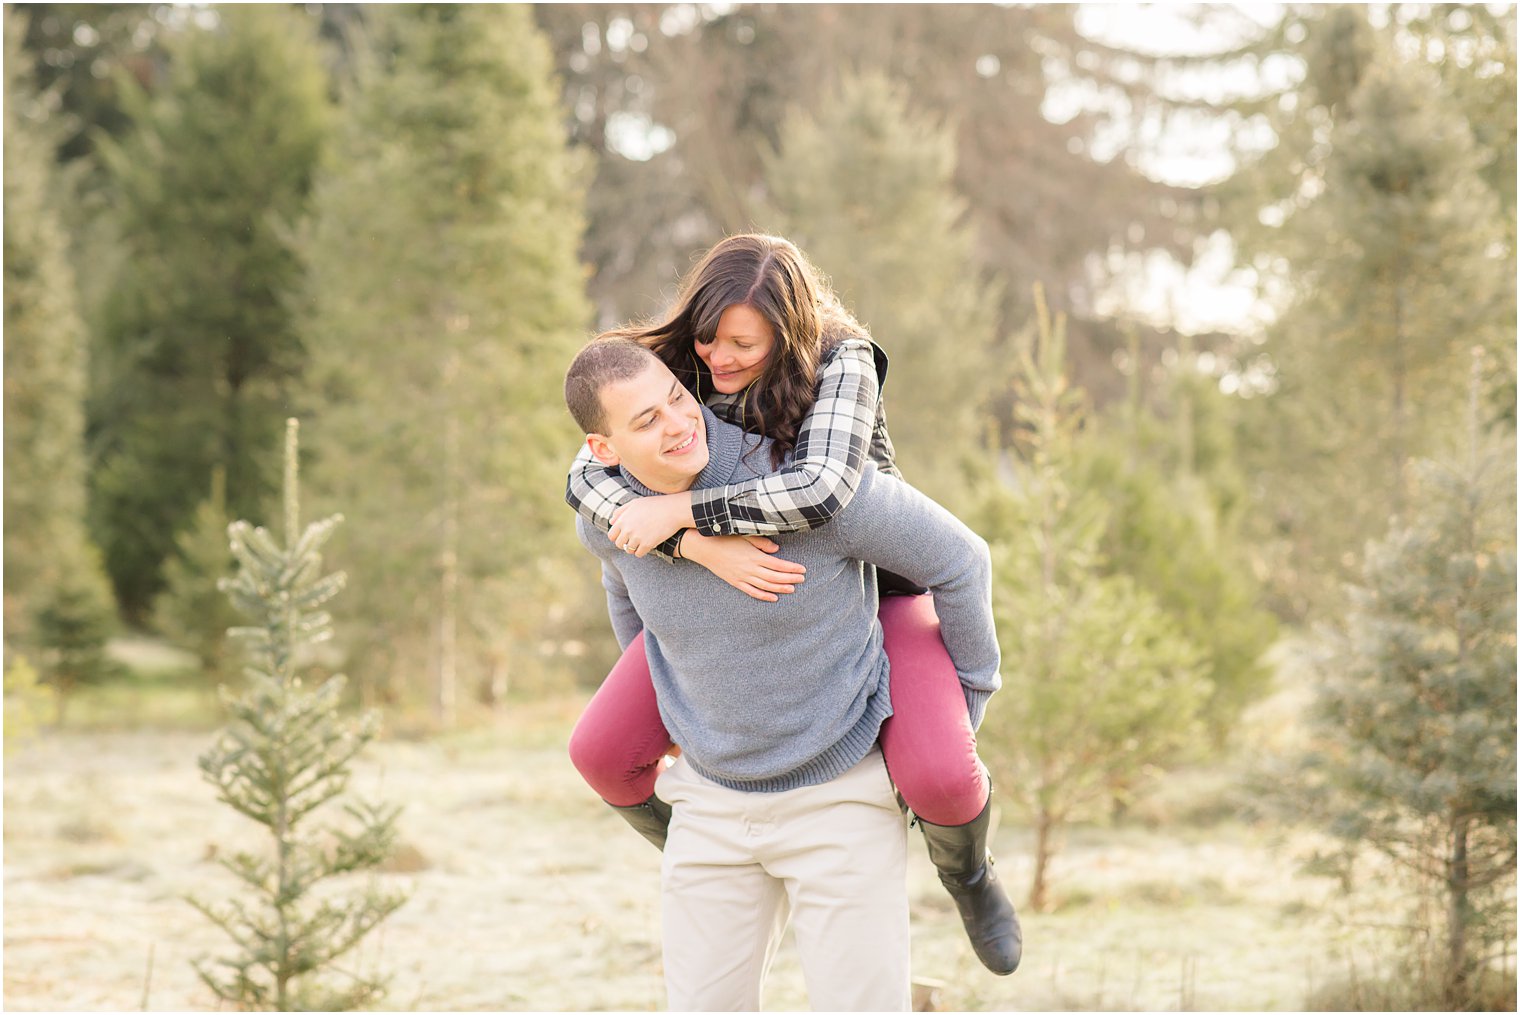 where to take engagement photos in the winter